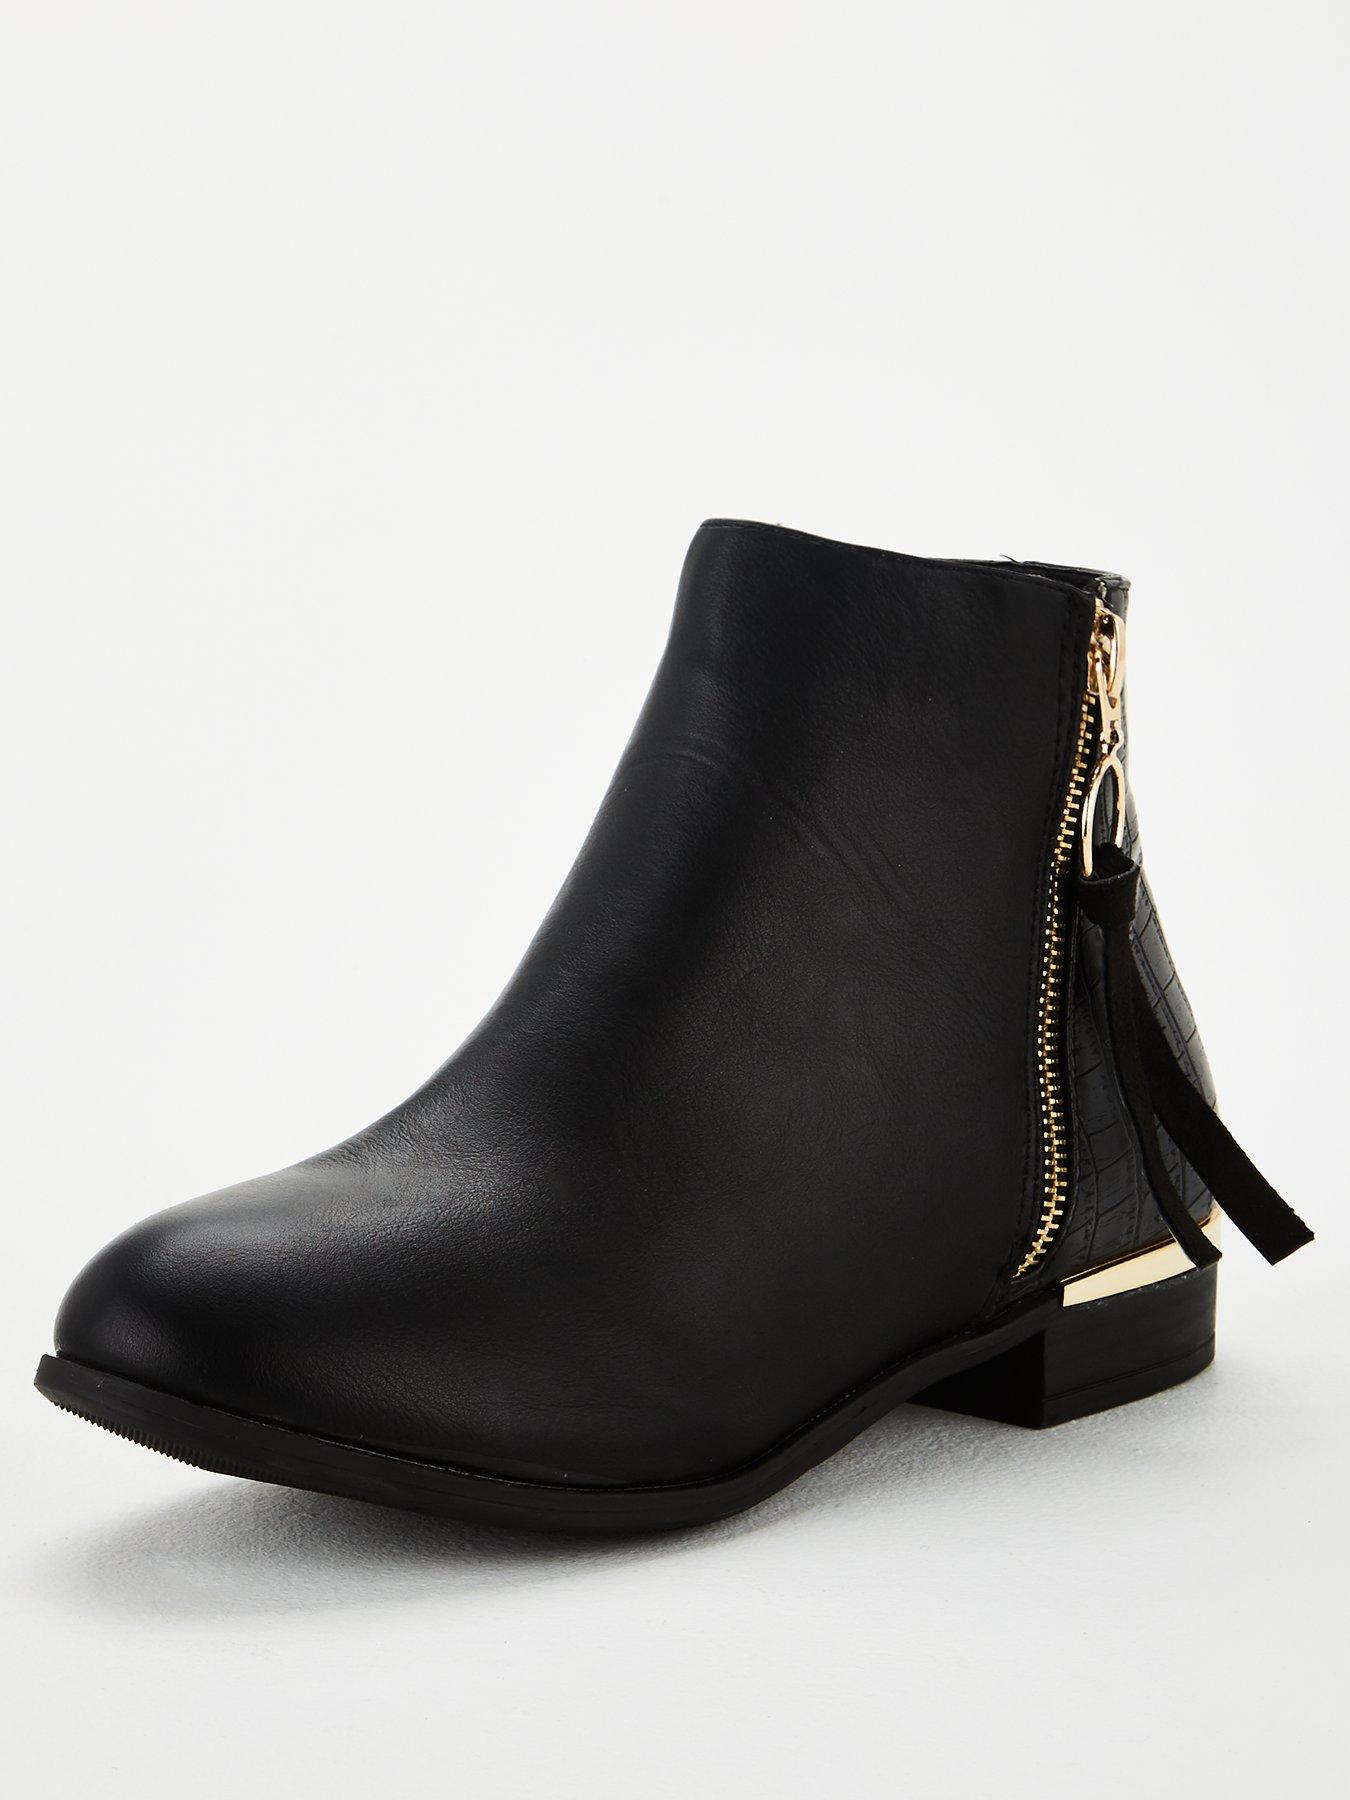 black ankle boots with gold trim